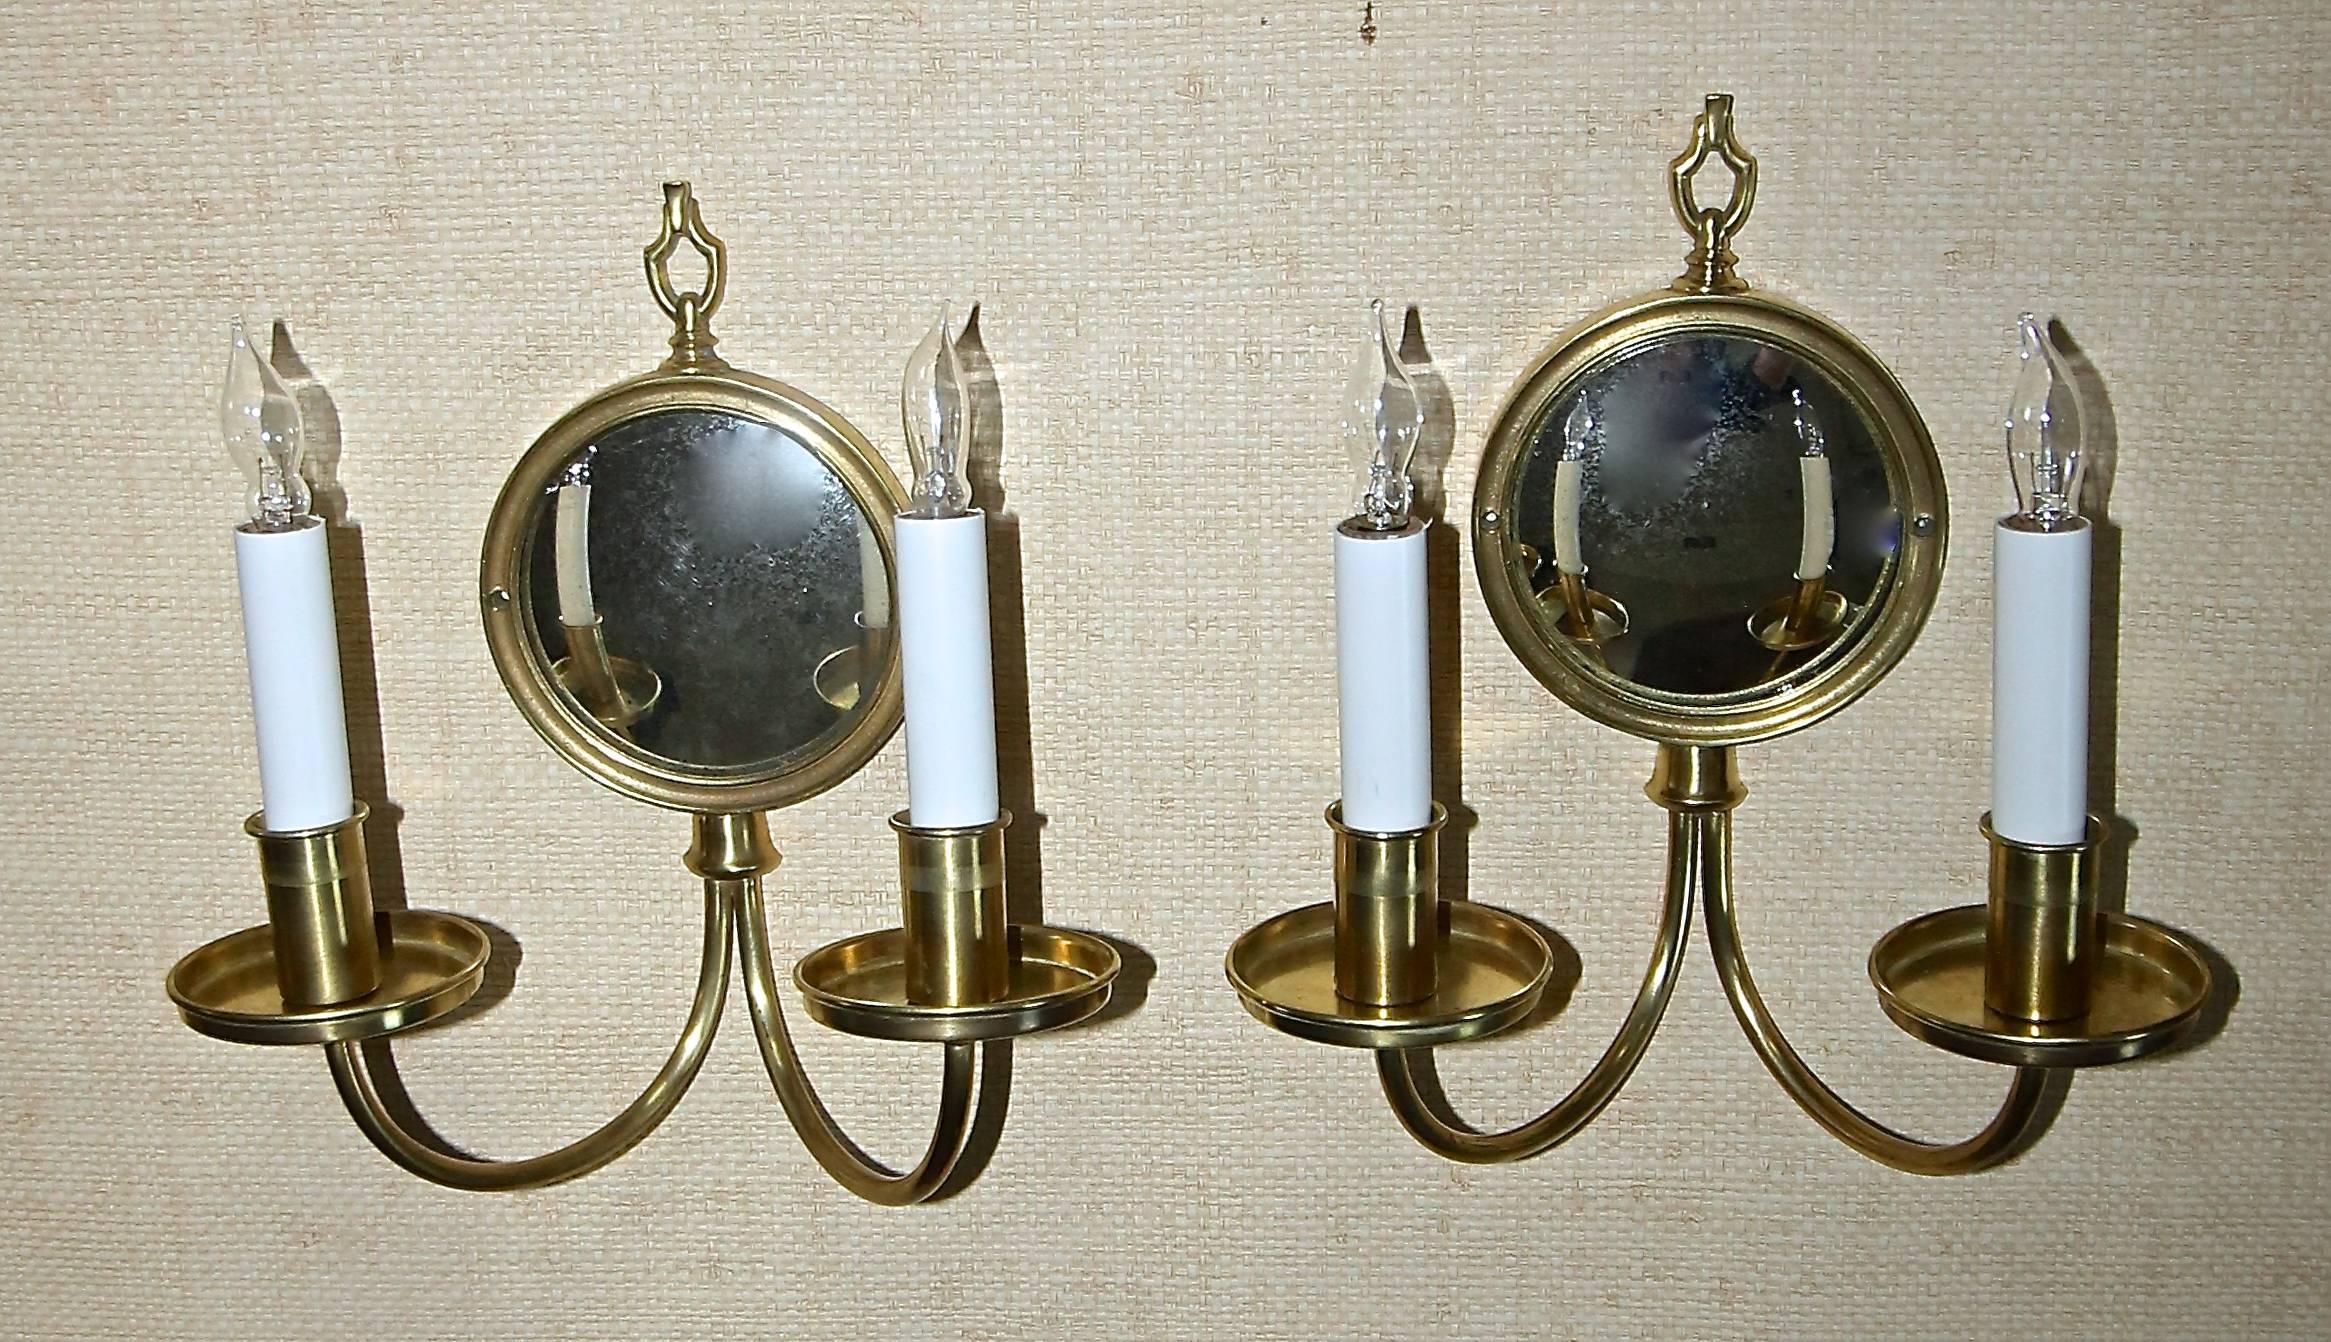 Pair 2 light brass wall sconces each with antiqued convex mirror backplate. Each sconce uses 2-40 watt candelabra base bulbs. Round brass backplates are 4 7/8" diameter. Newly wired.